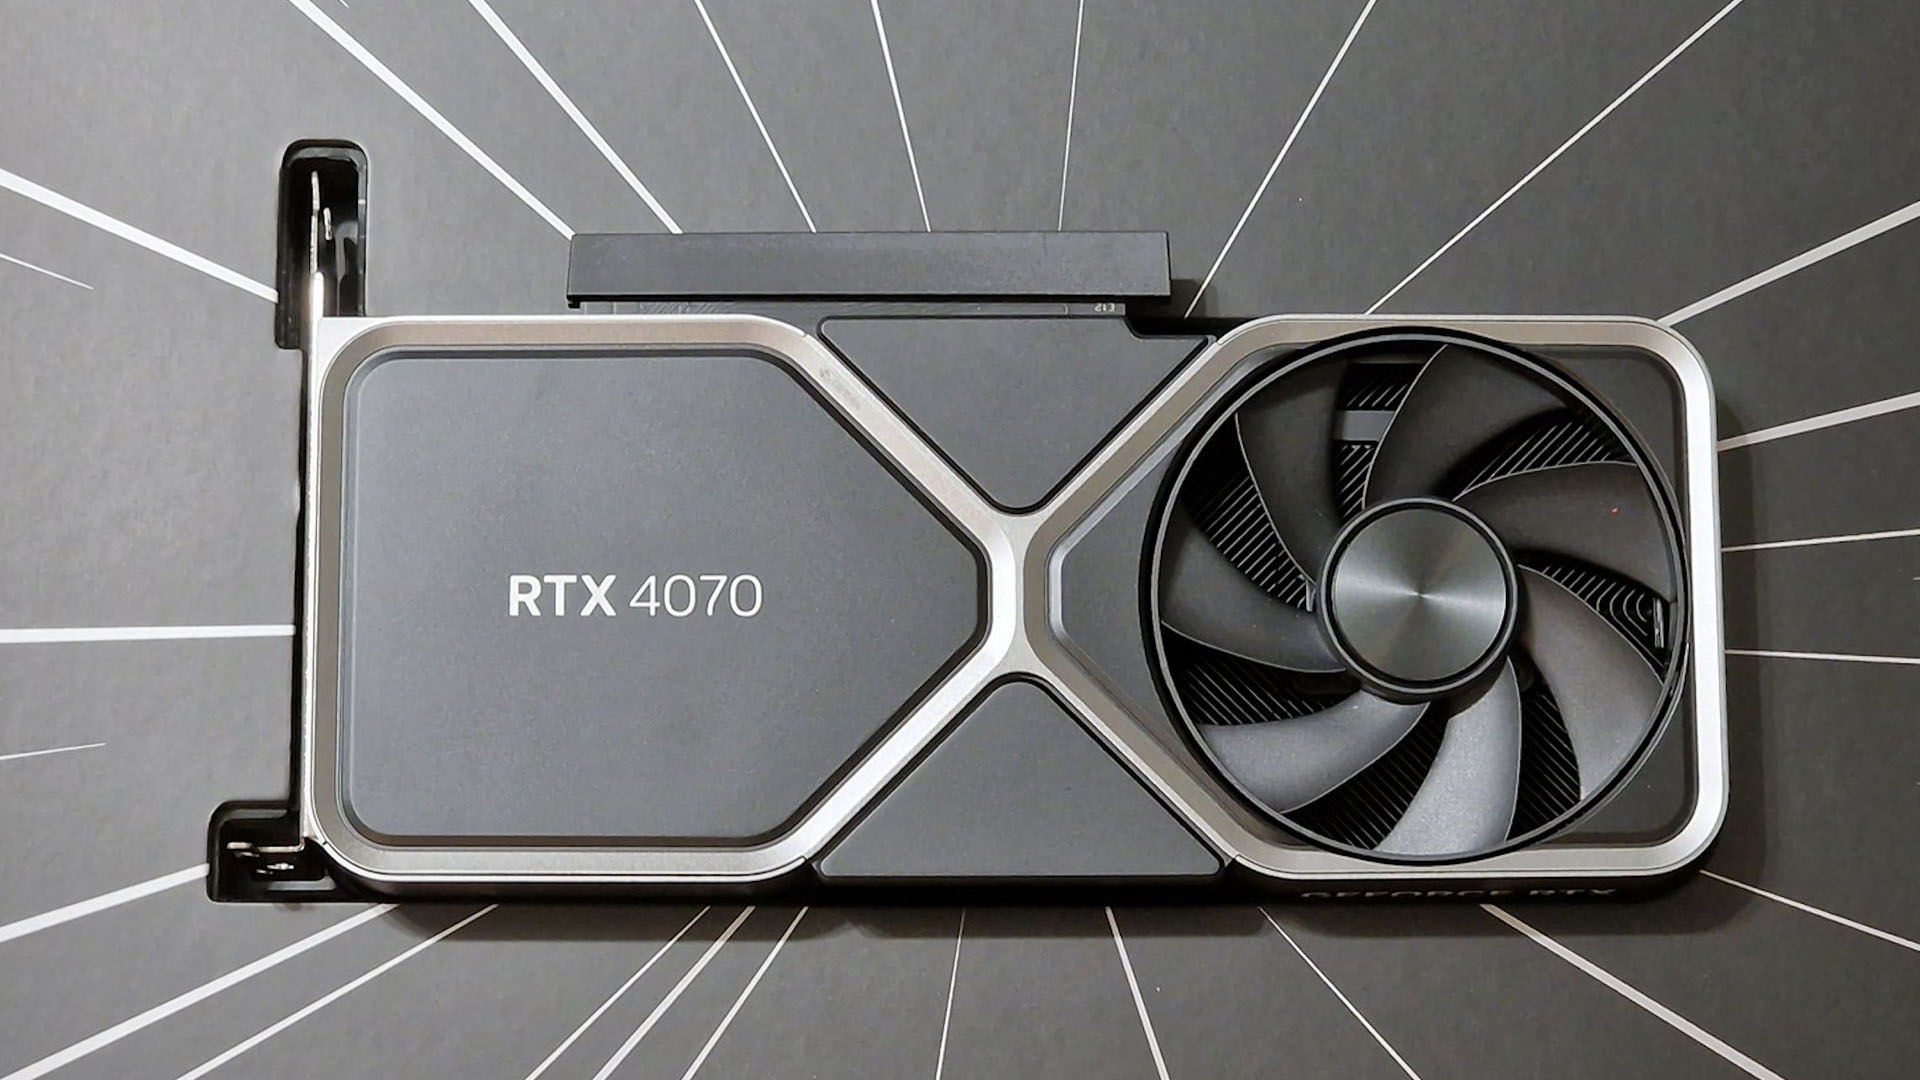 GeForce RTX 4080 Custom Cards from Gigabyte and MSI Pictured